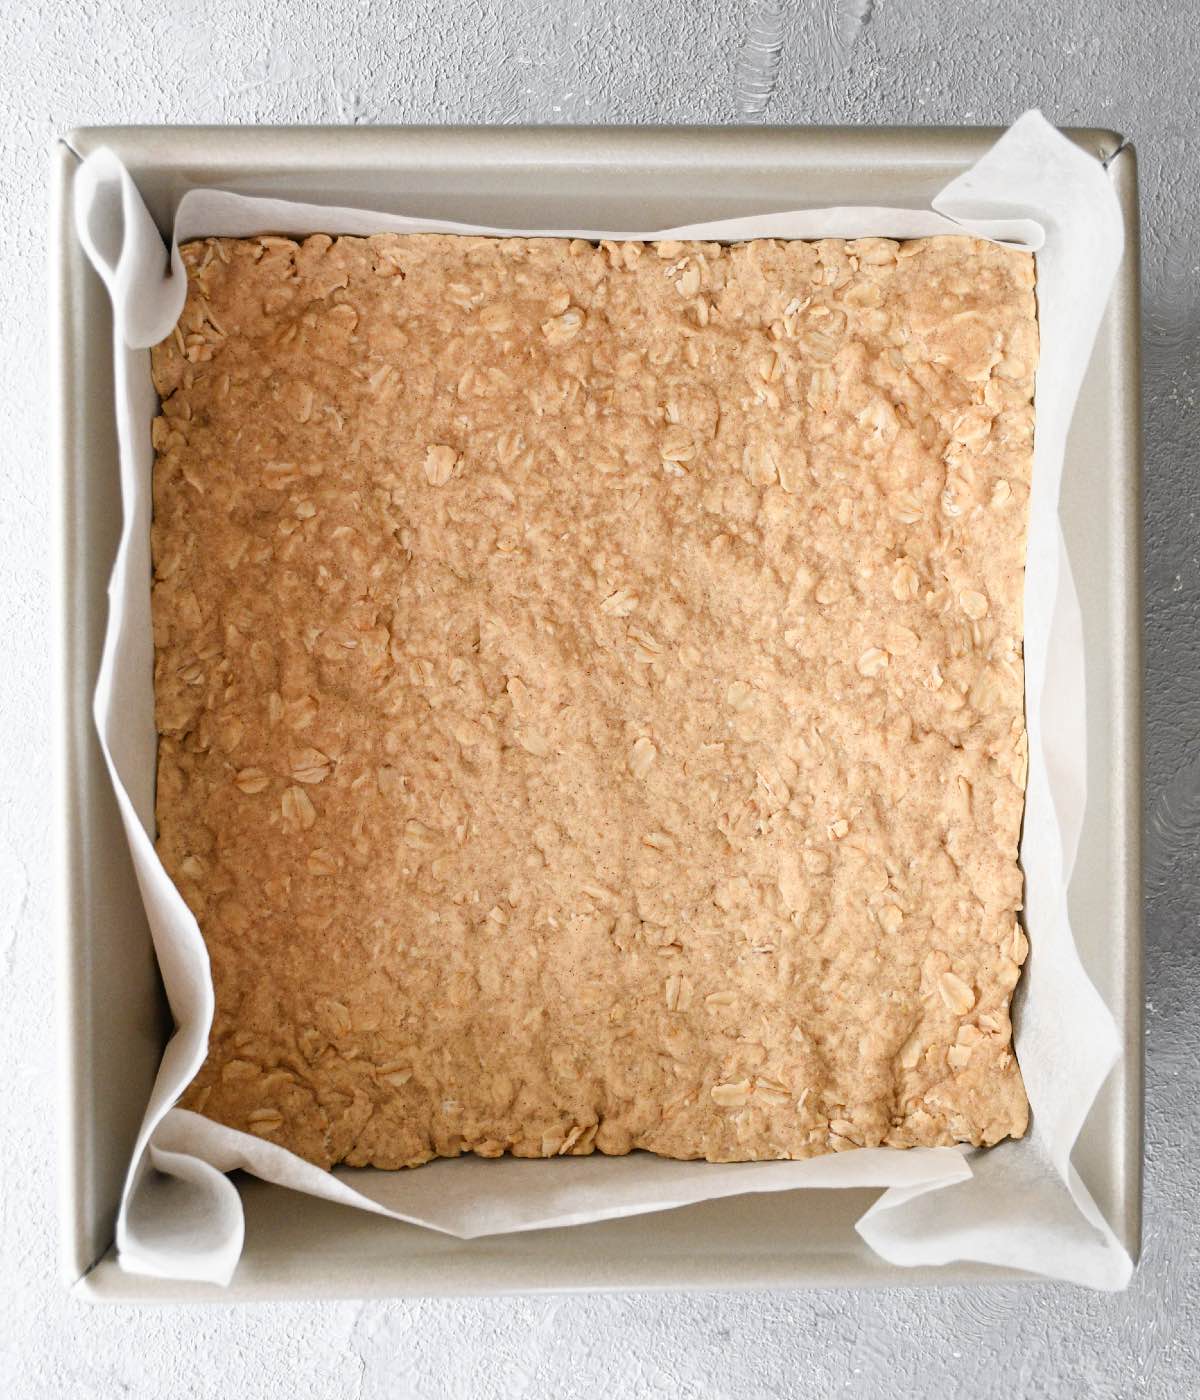 baked oatmeal crust in an 8"x8" square baking pan.